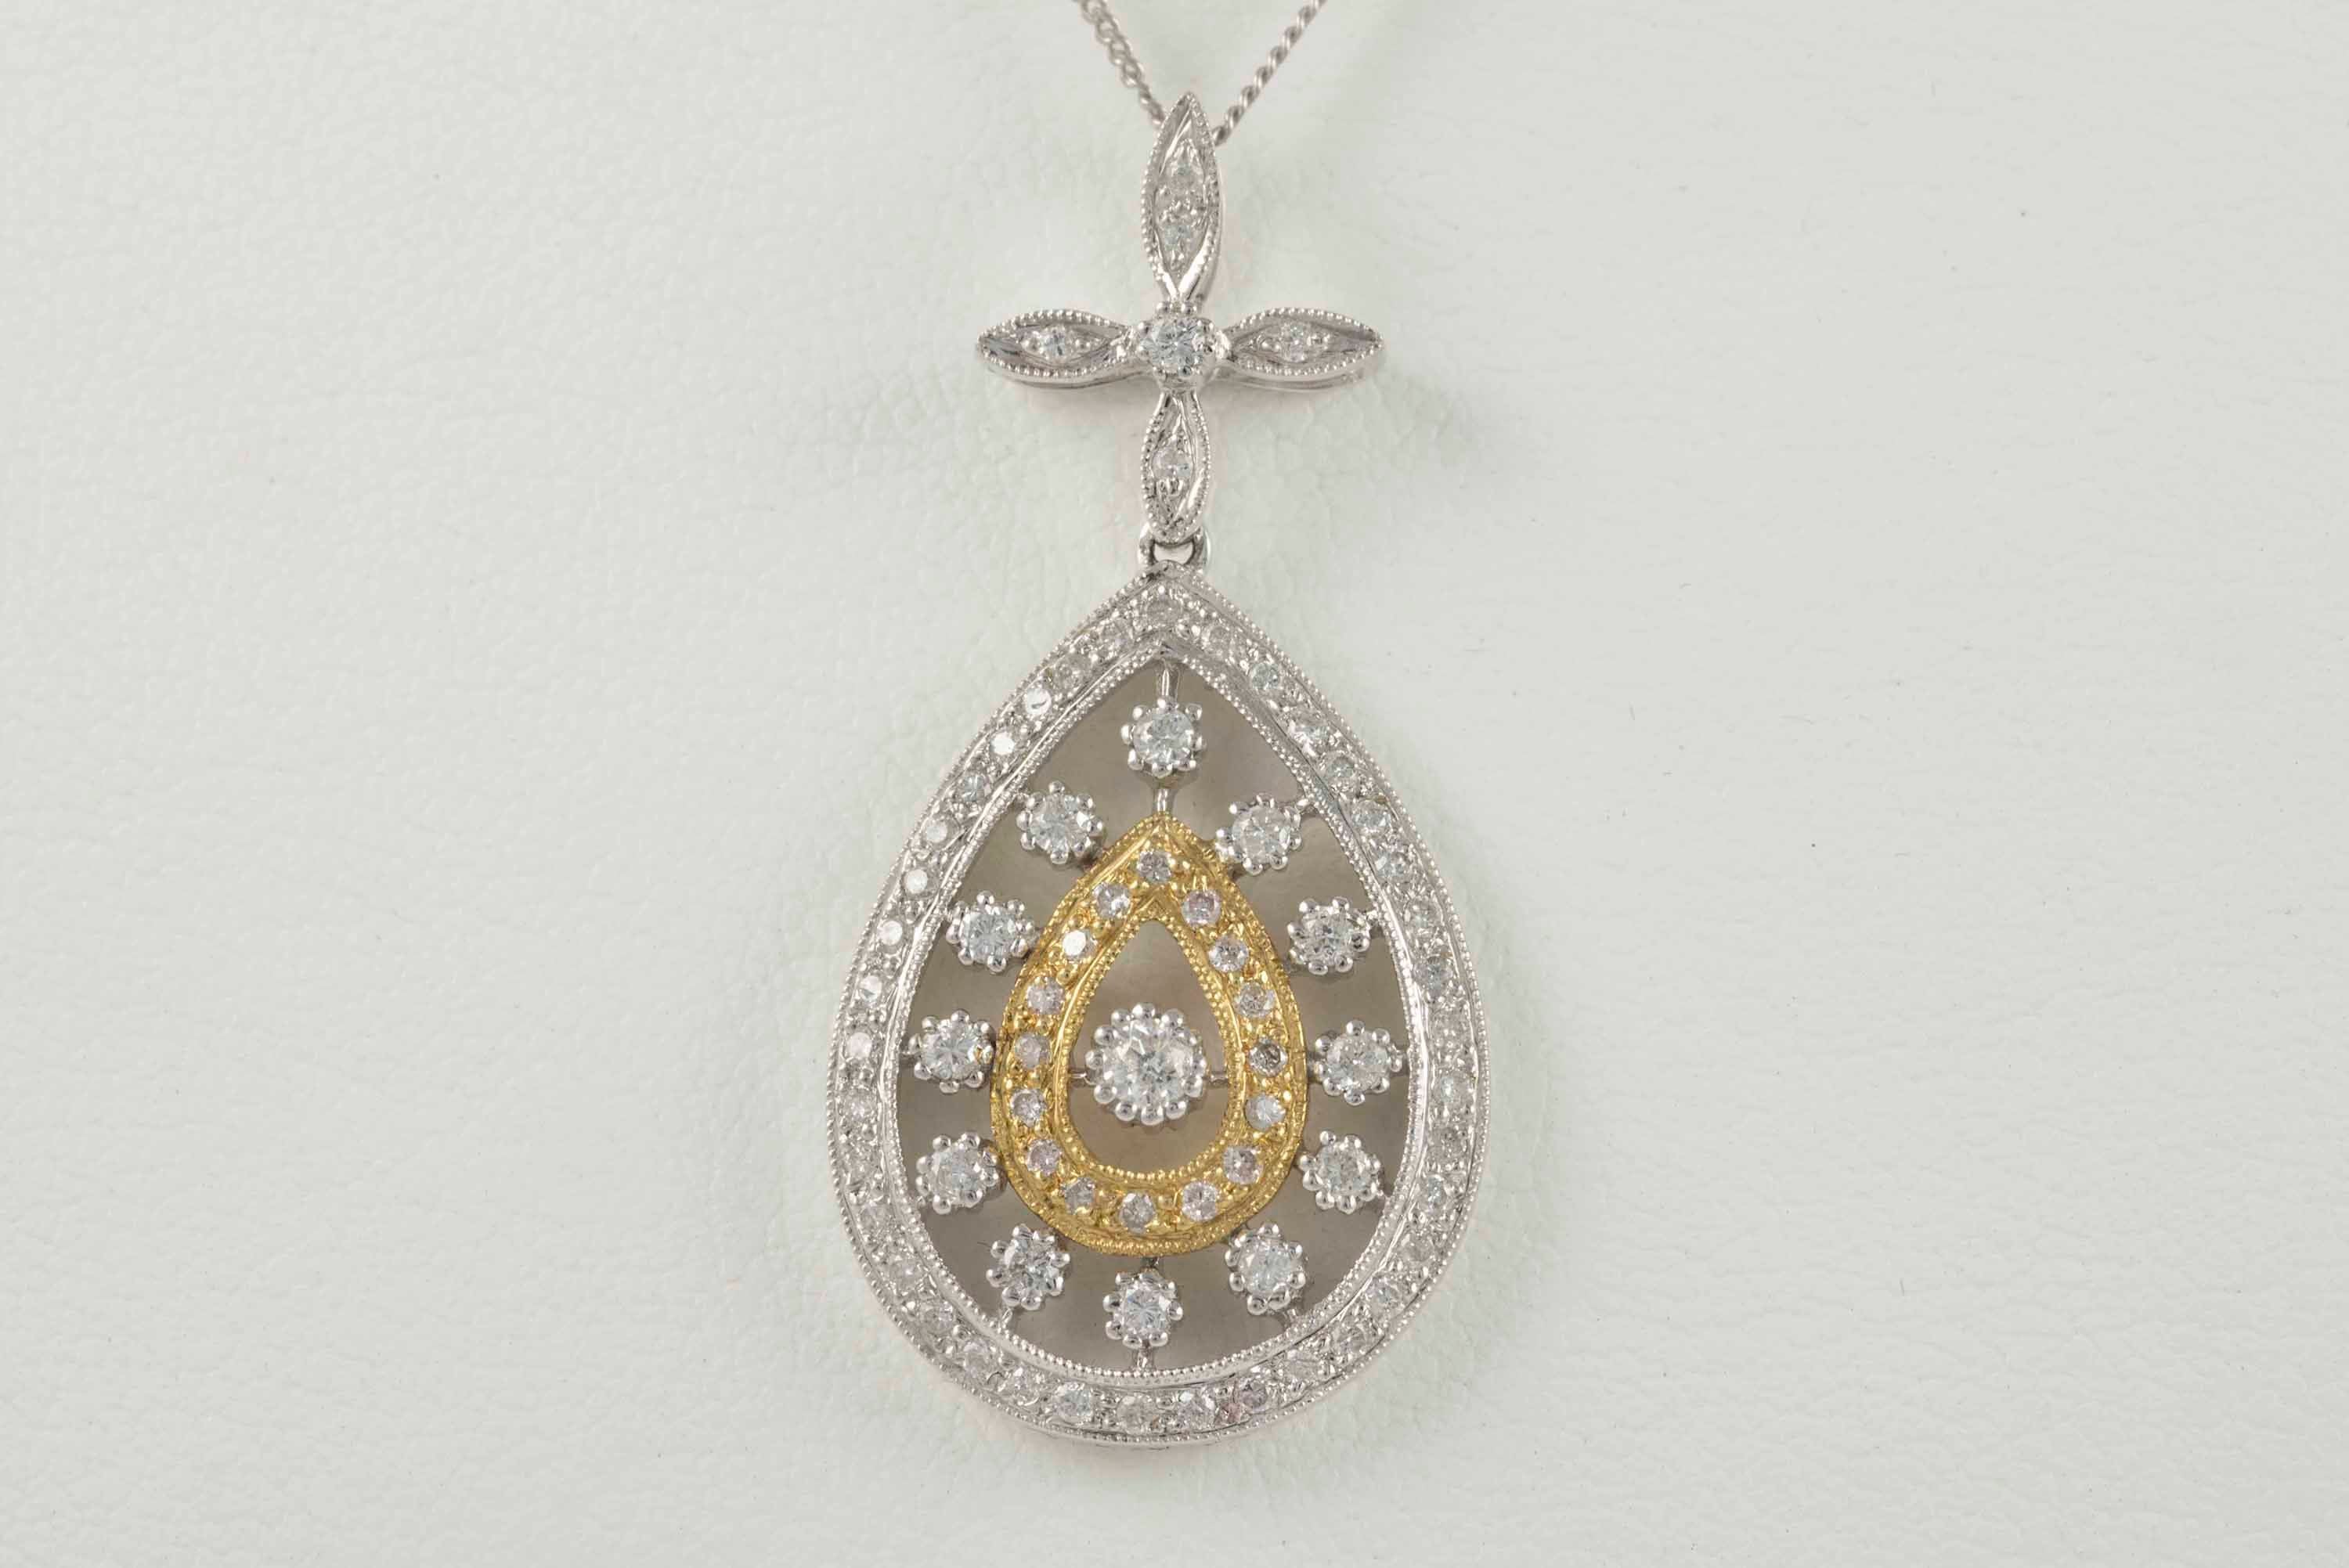 Crafted in 14kt white and yellow gold, this estate necklace features a flower and tear drop pendant adorned with seventy-three round diamonds, H-I color, SI-I1 clarity, totaling approximately 0.70 carats. The chain is 18 inches long. 

